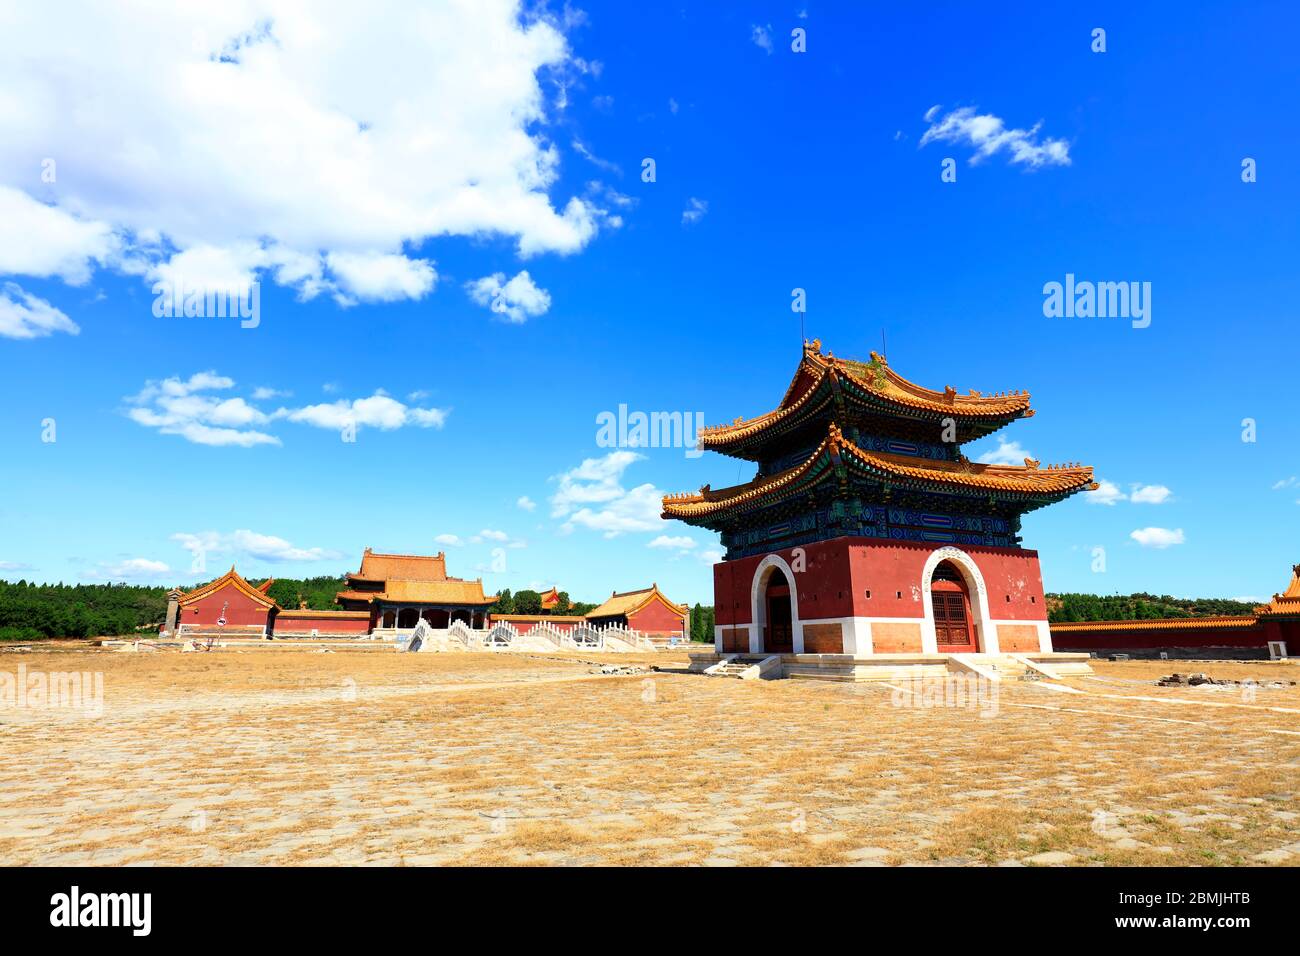 Ancient Chinese architecture under the blue sky Stock Photo